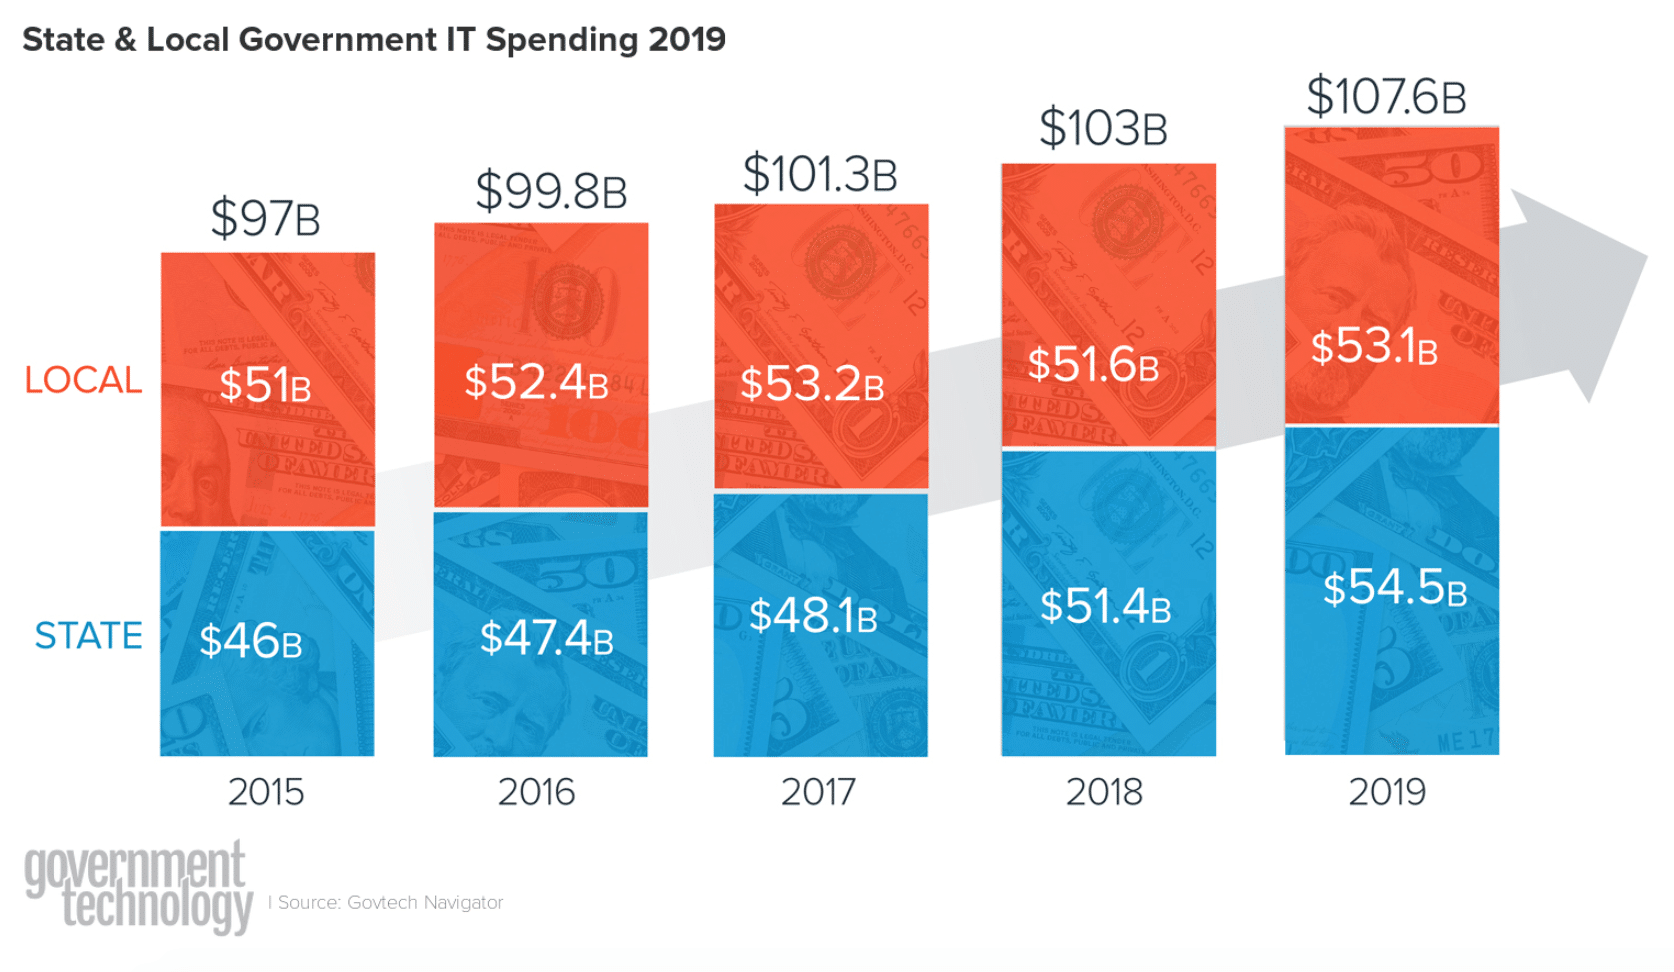 State and local GovTech spending 2019